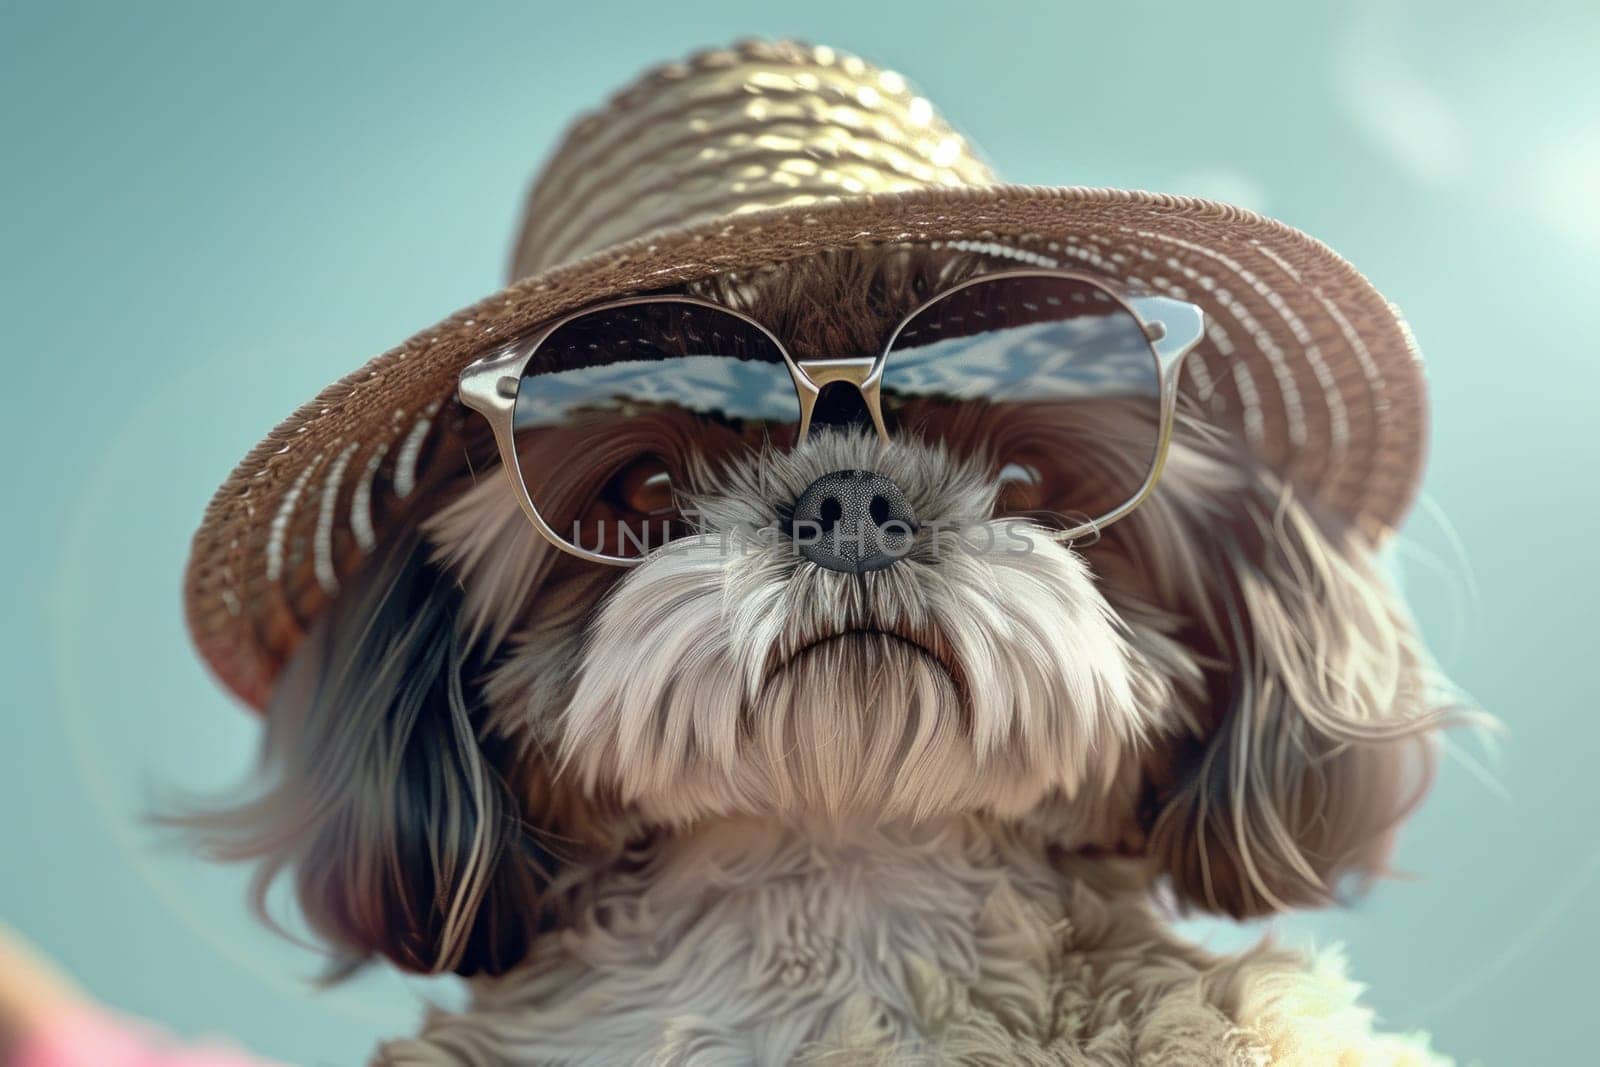 A small dog wearing sunglasses and a straw hat.